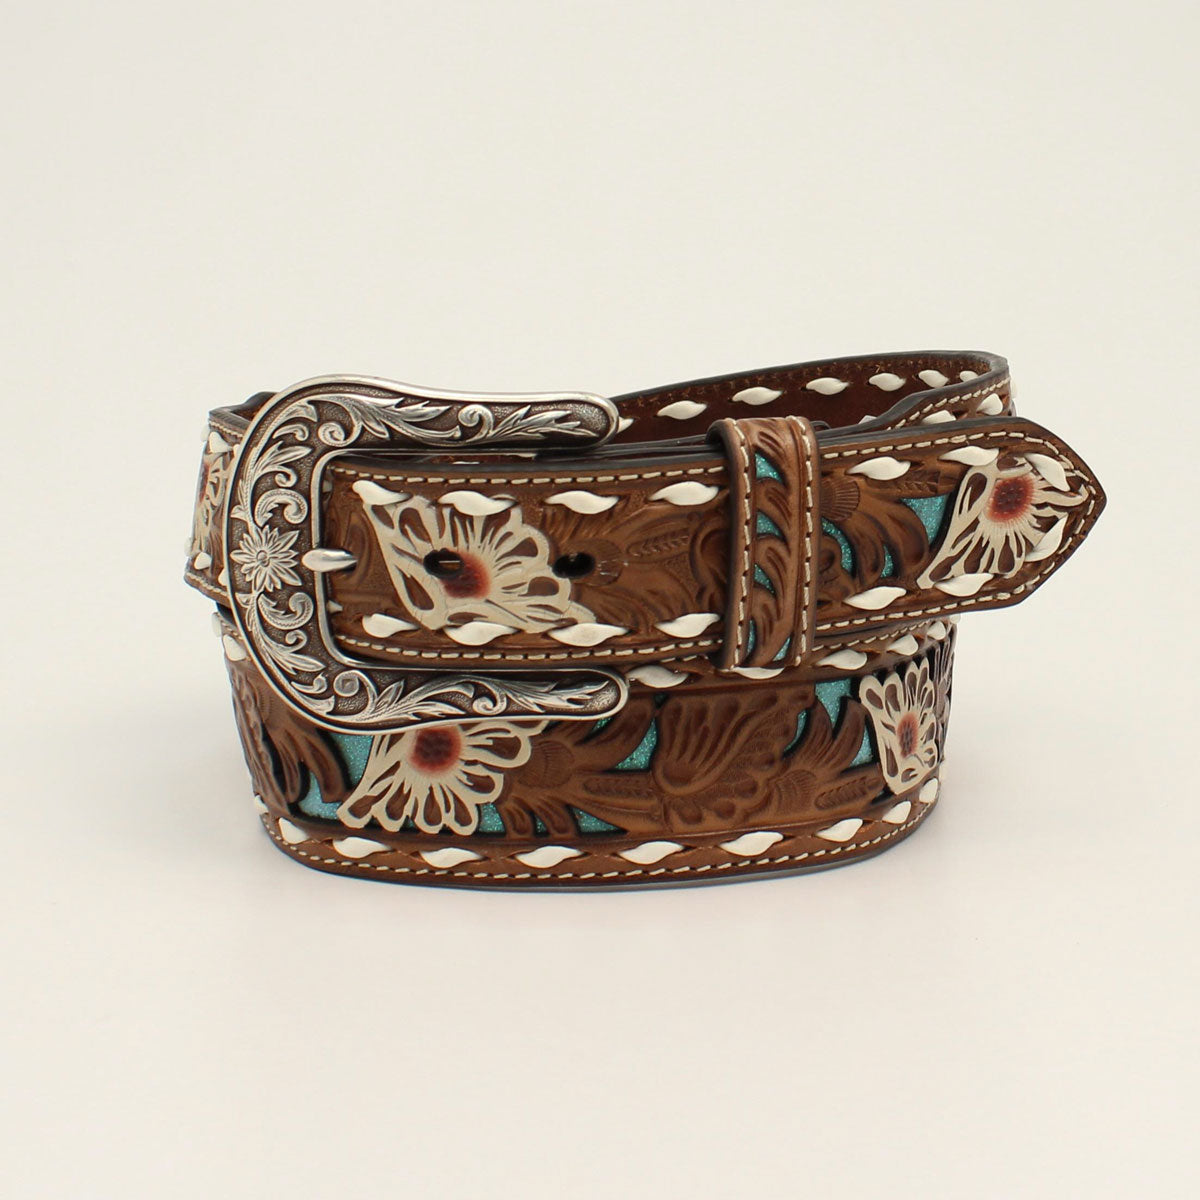 Ariat Women's Leather Floral Pierced Belt - Brown/Turquoise